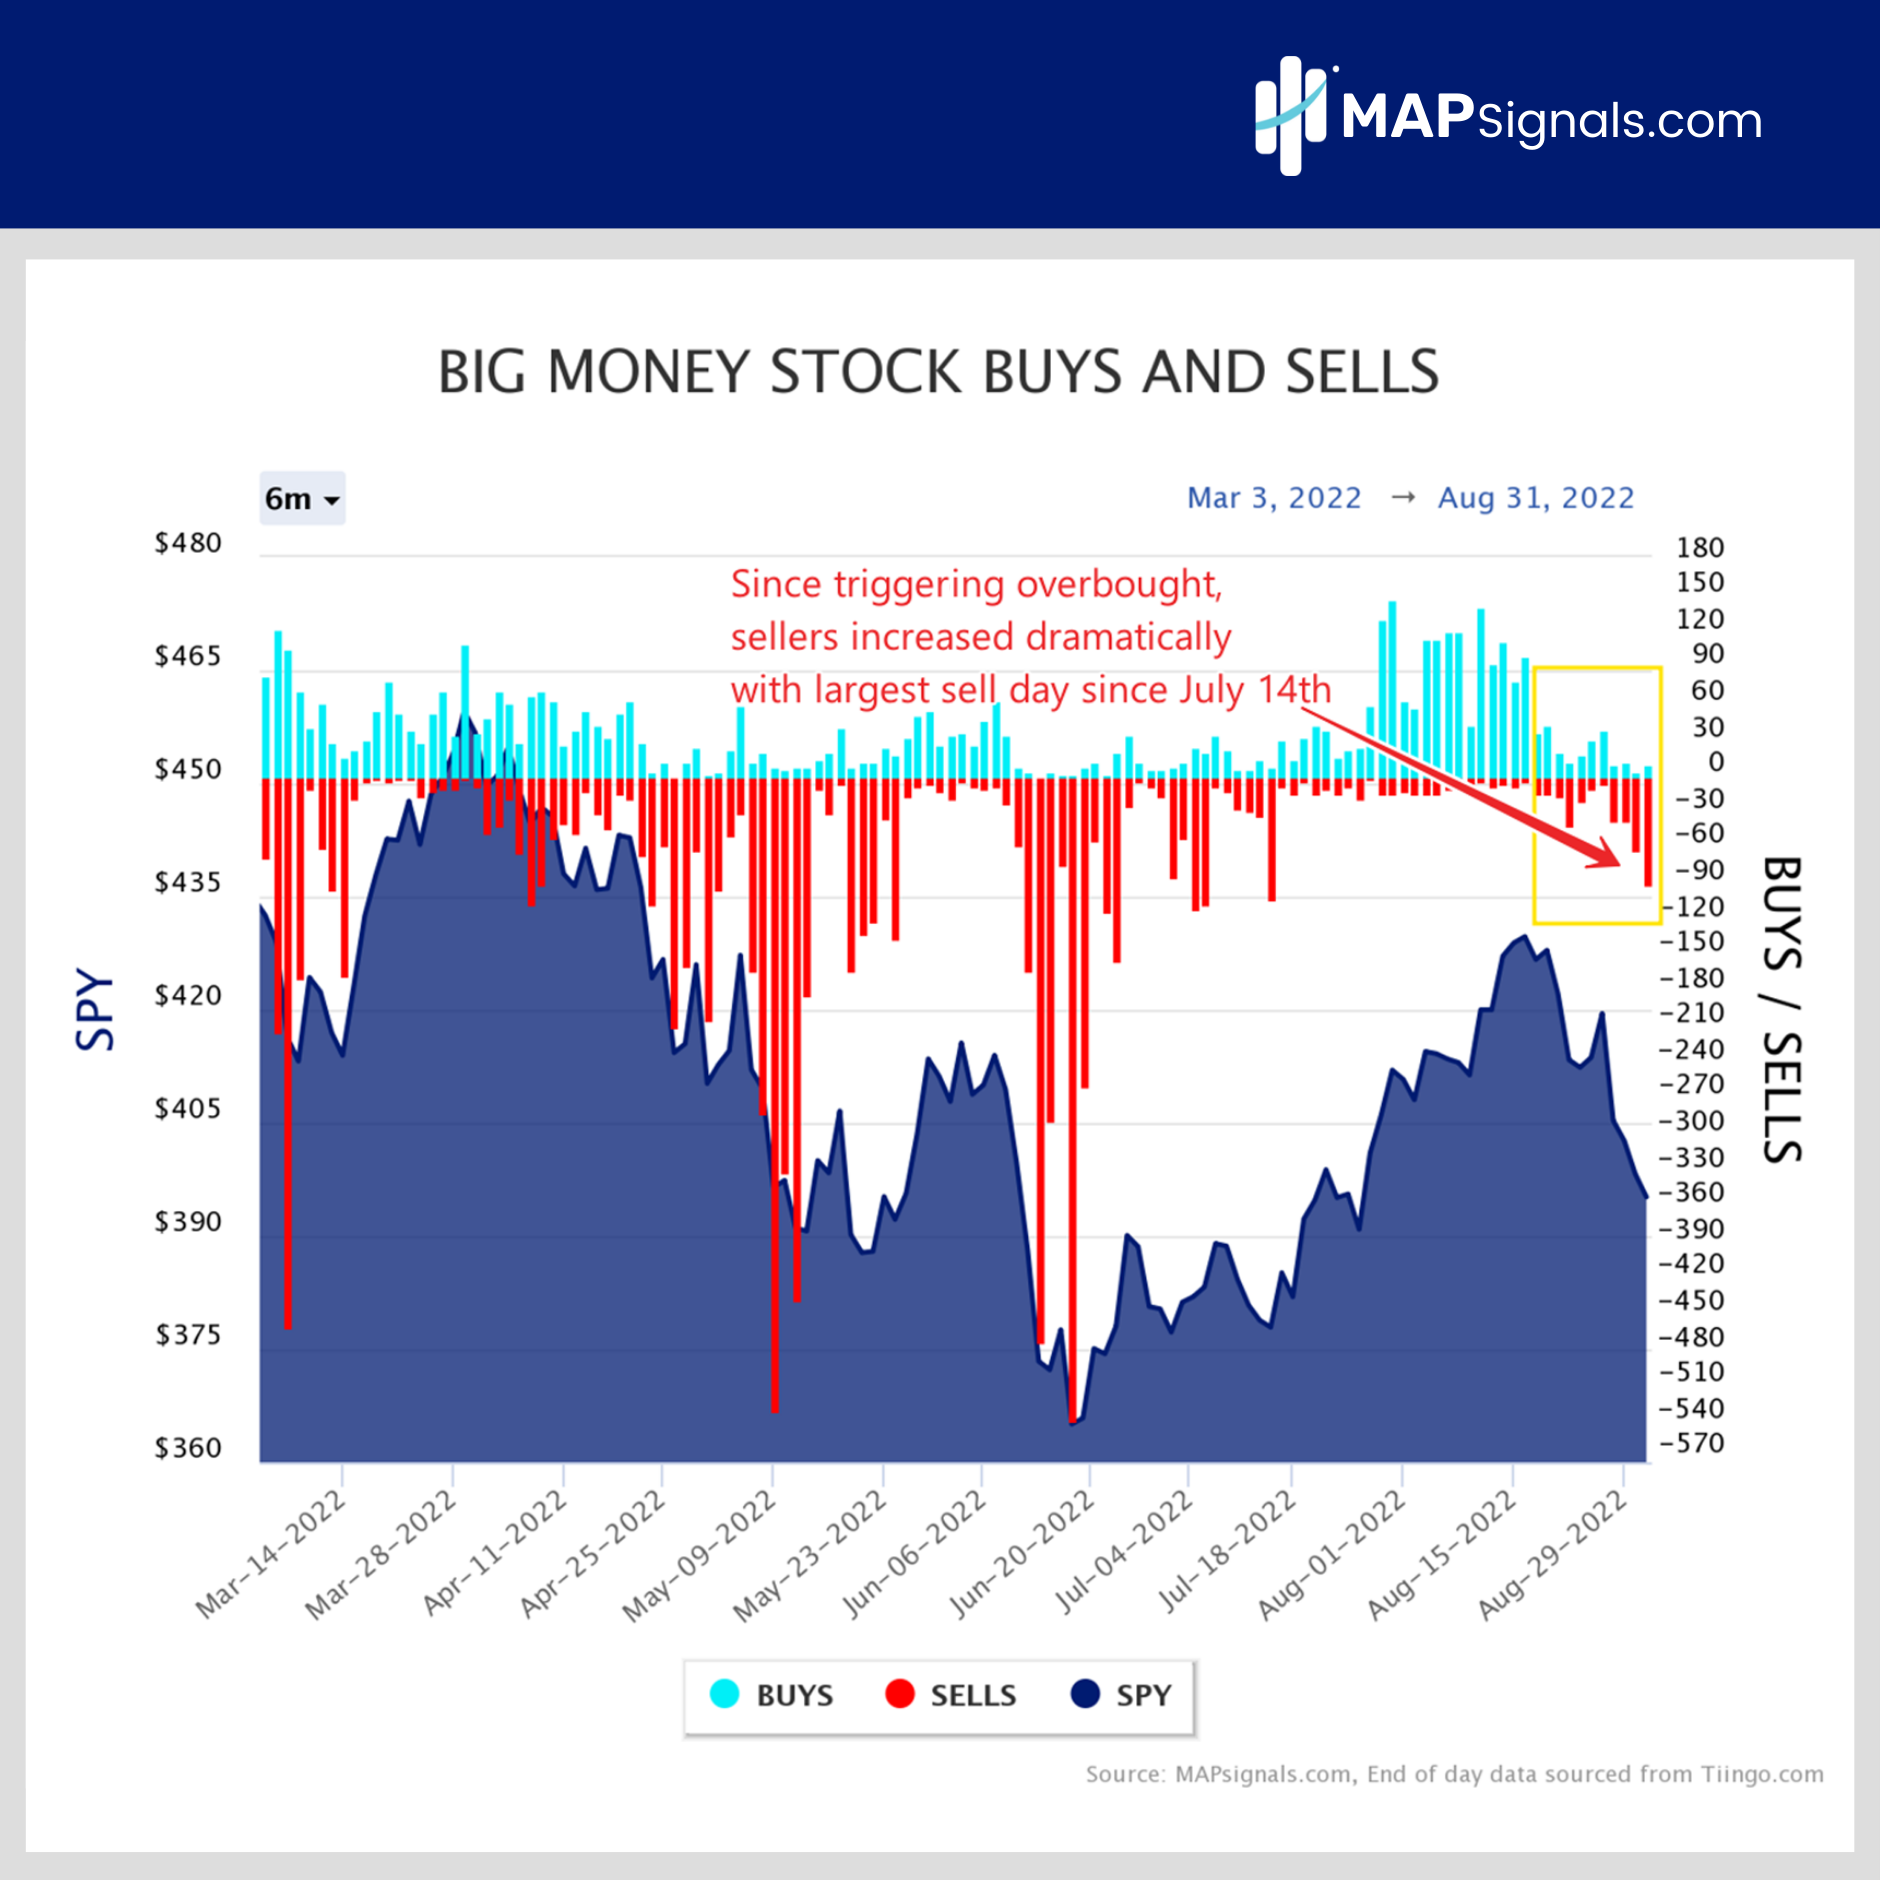 Since triggering overbought - sellers increased dramatically | Big Money Buys and Sells